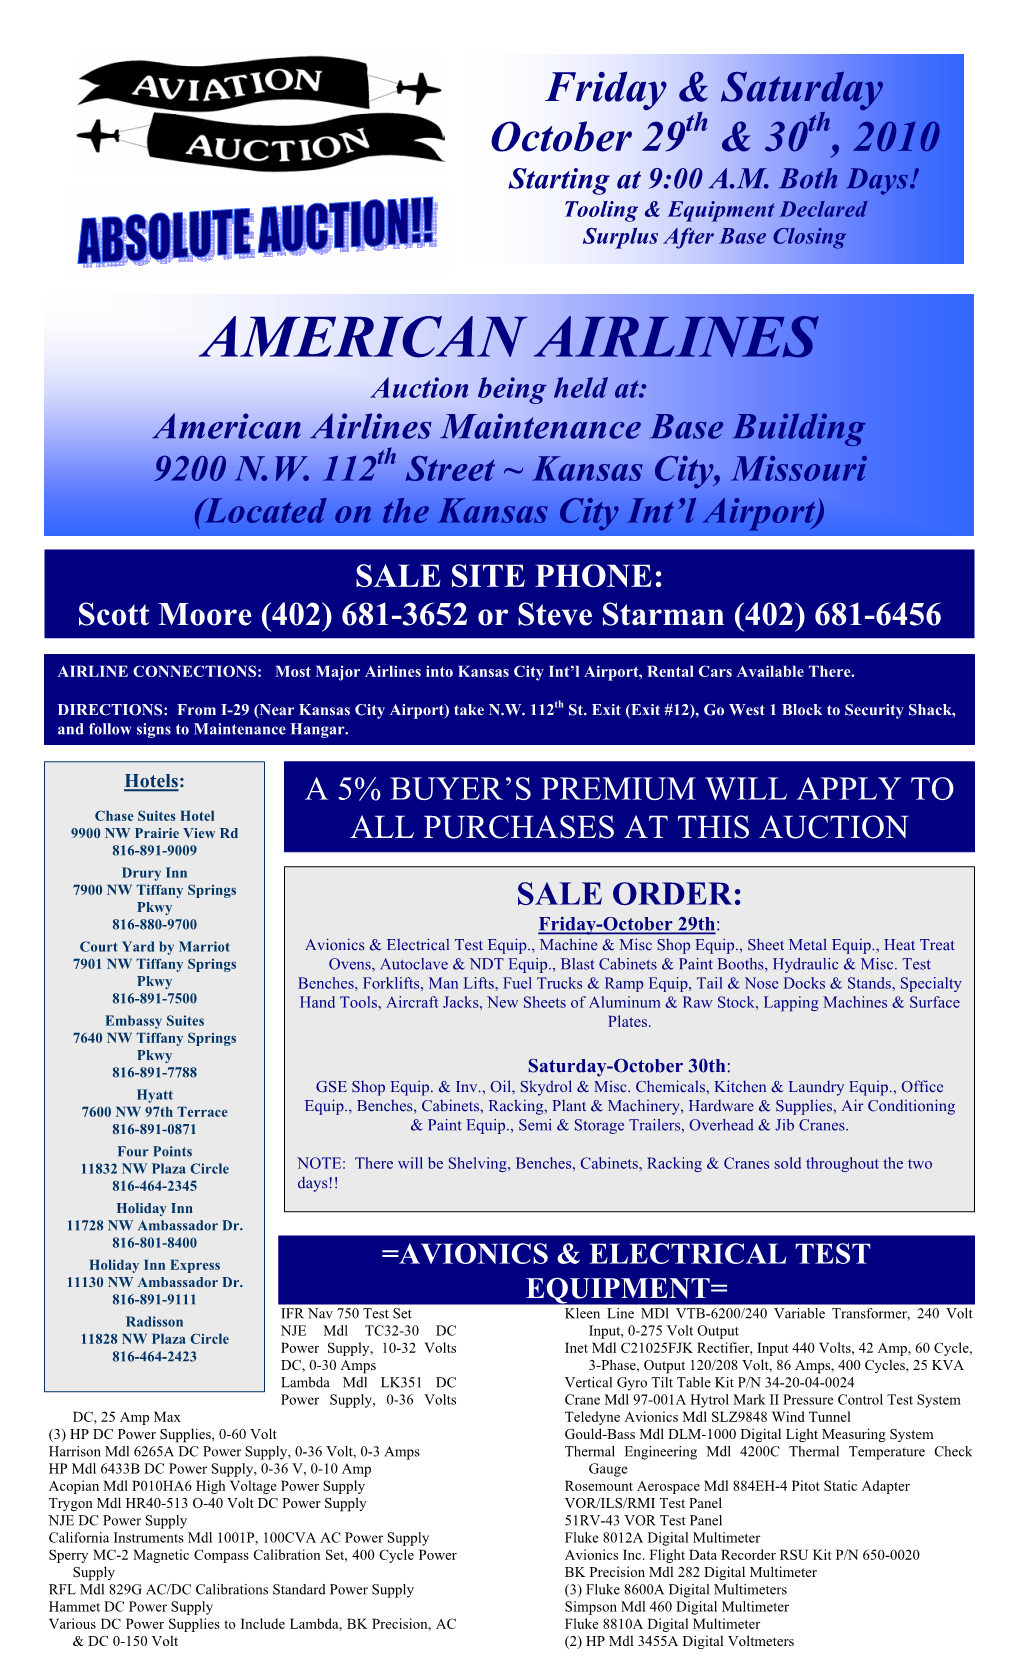 AMERICAN AIRLINES Auction Being Held At: American Airlines Maintenance Base Building 9200 N.W